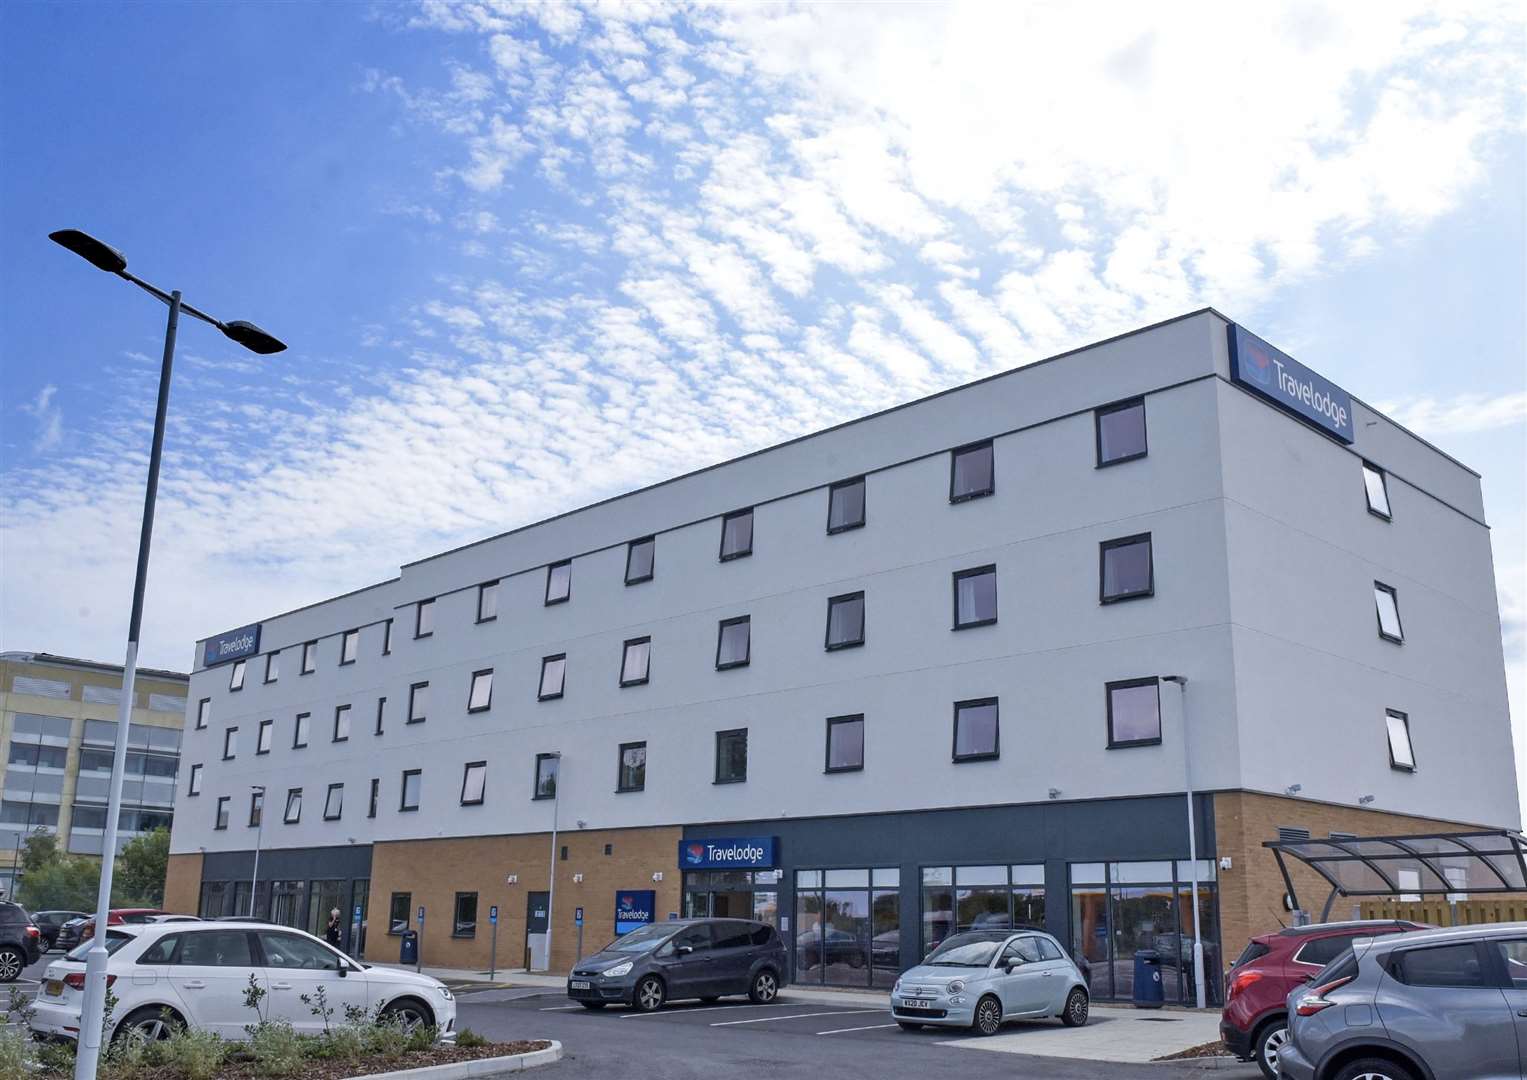 Travelodge is looking to open nine more hotels across Kent, including ones in Canterbury and Herne Bay. Picture: Emma Sheppard